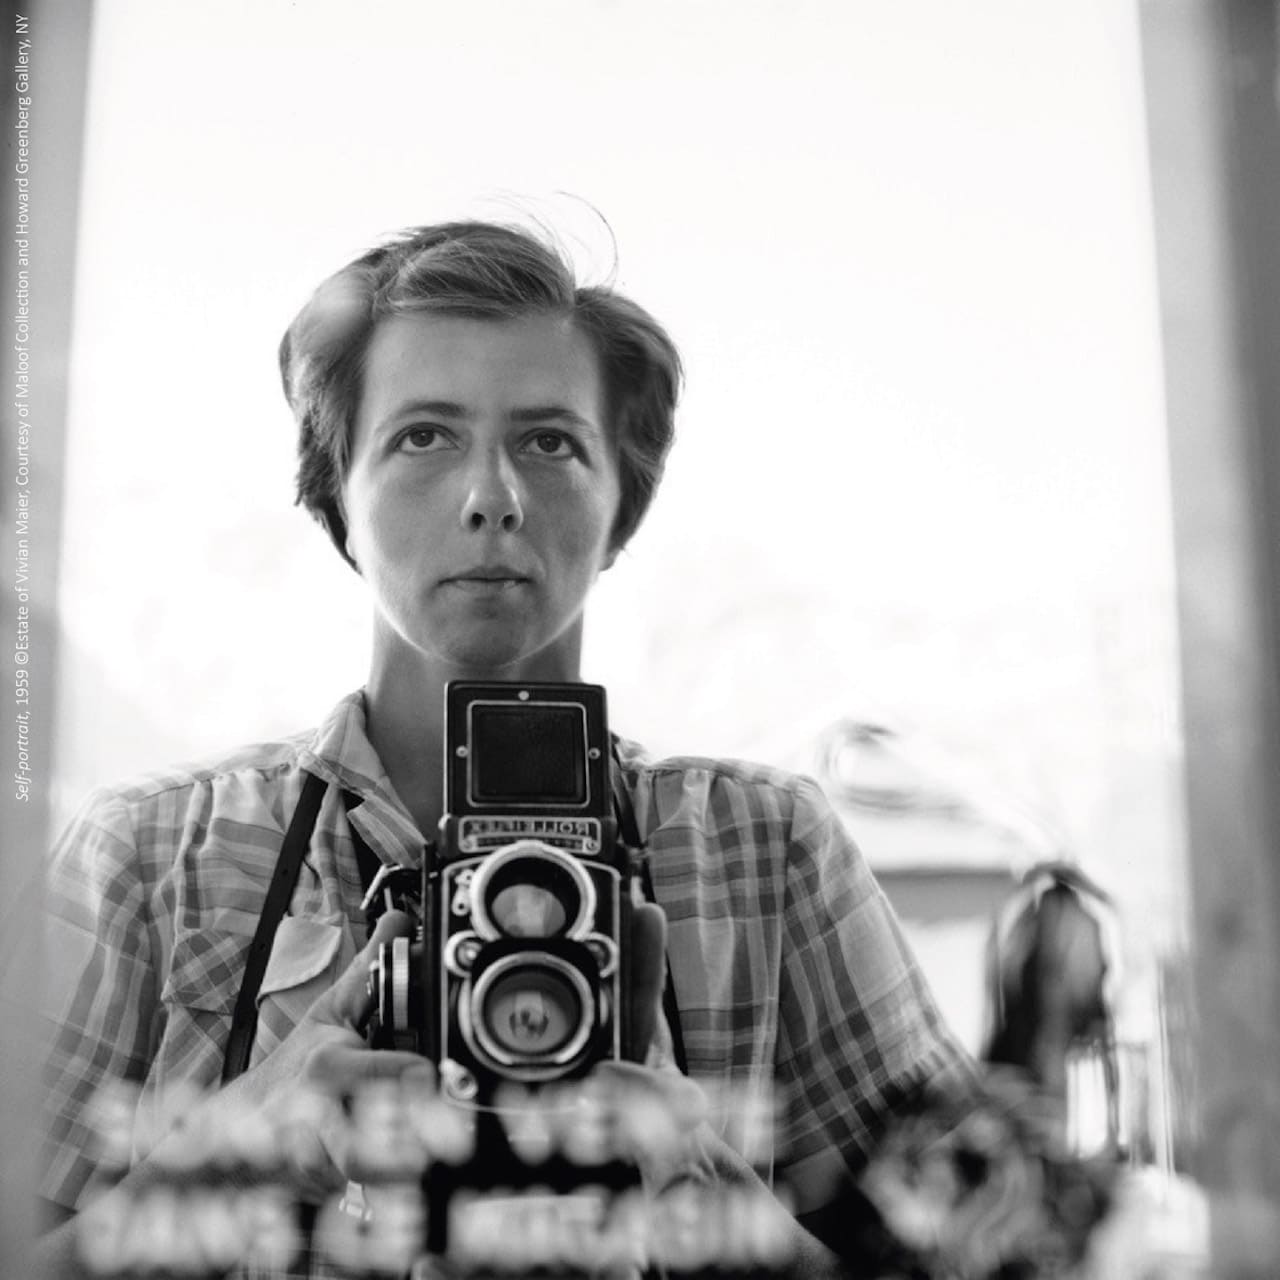 Self-portrait, 1959 ©Estate of Vivian Maier, Courtesy of Maloof Collection and Howard Greenberg Gallery, NY